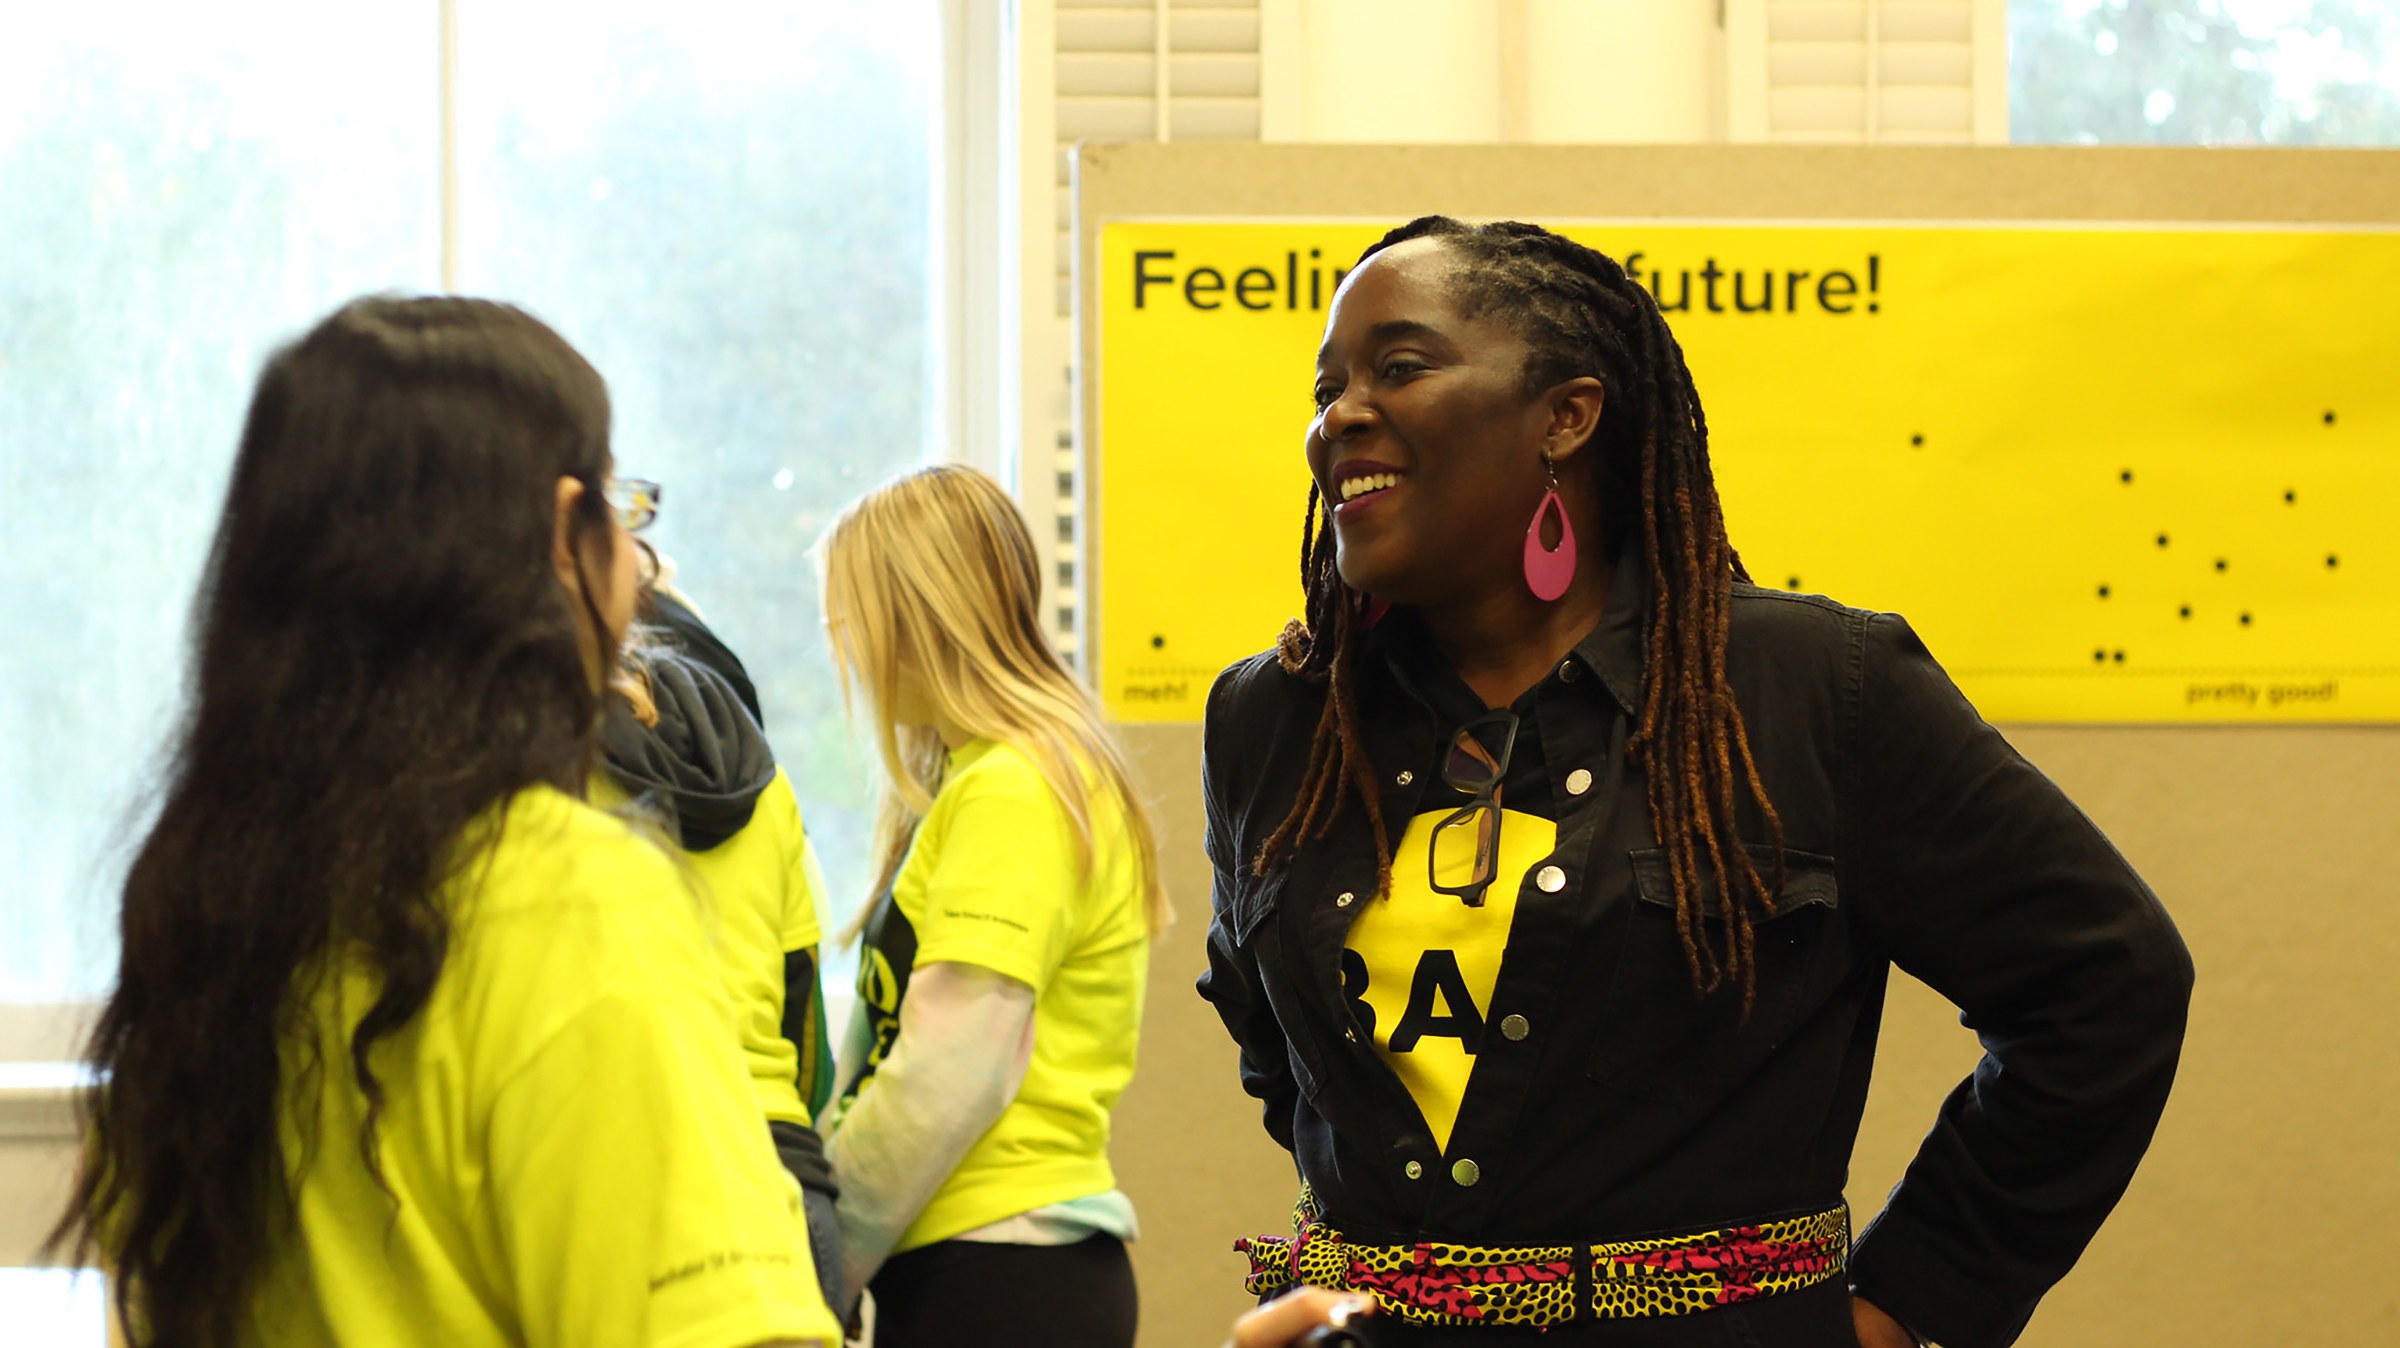 Photo of two people speaking to each other in front of bright yellow sign, with other people in the background